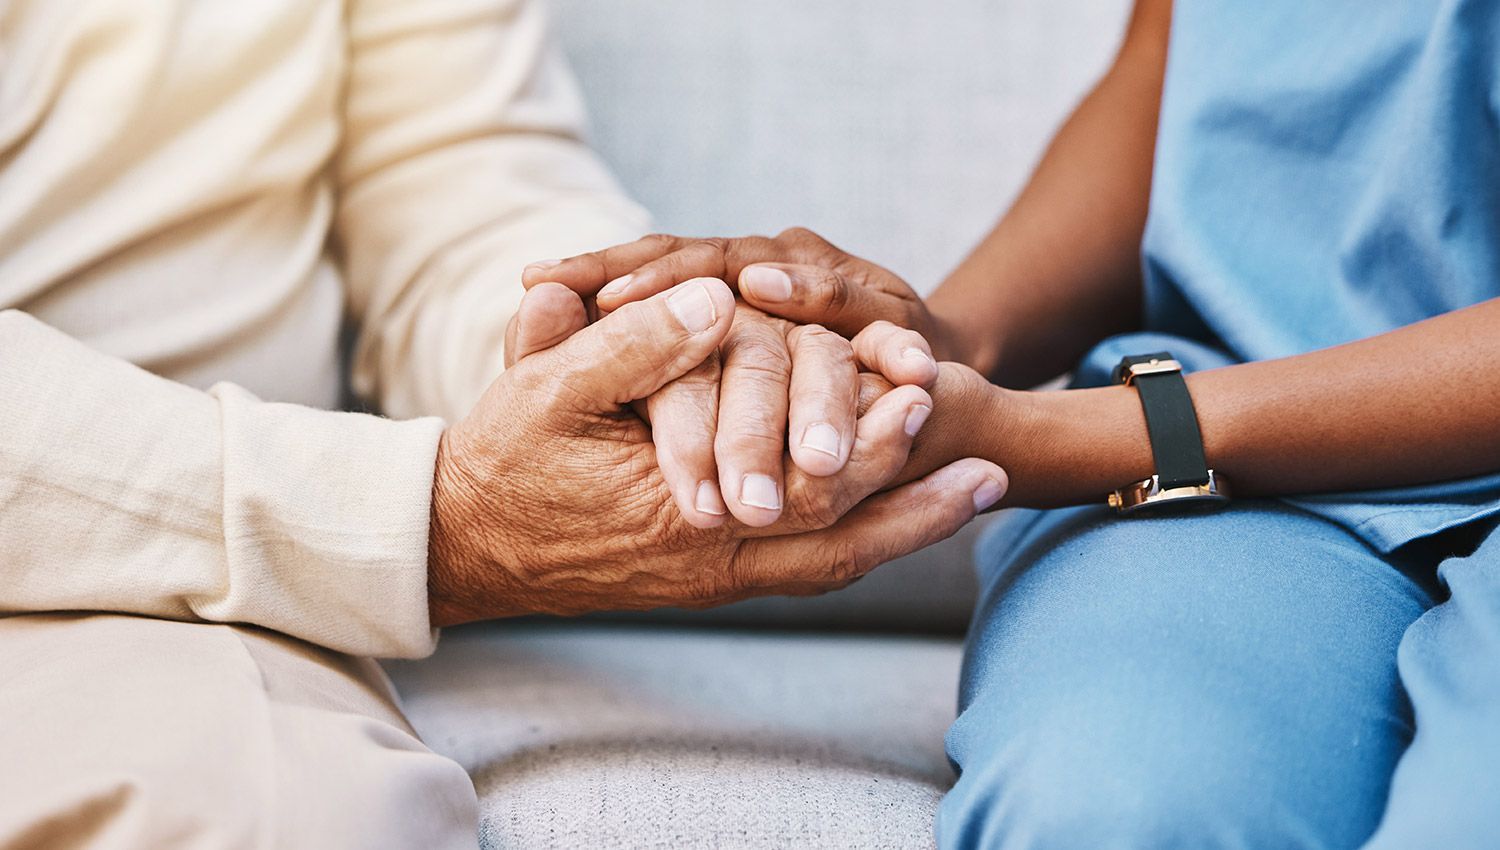 A nurse is holding the hands of an elderly woman.